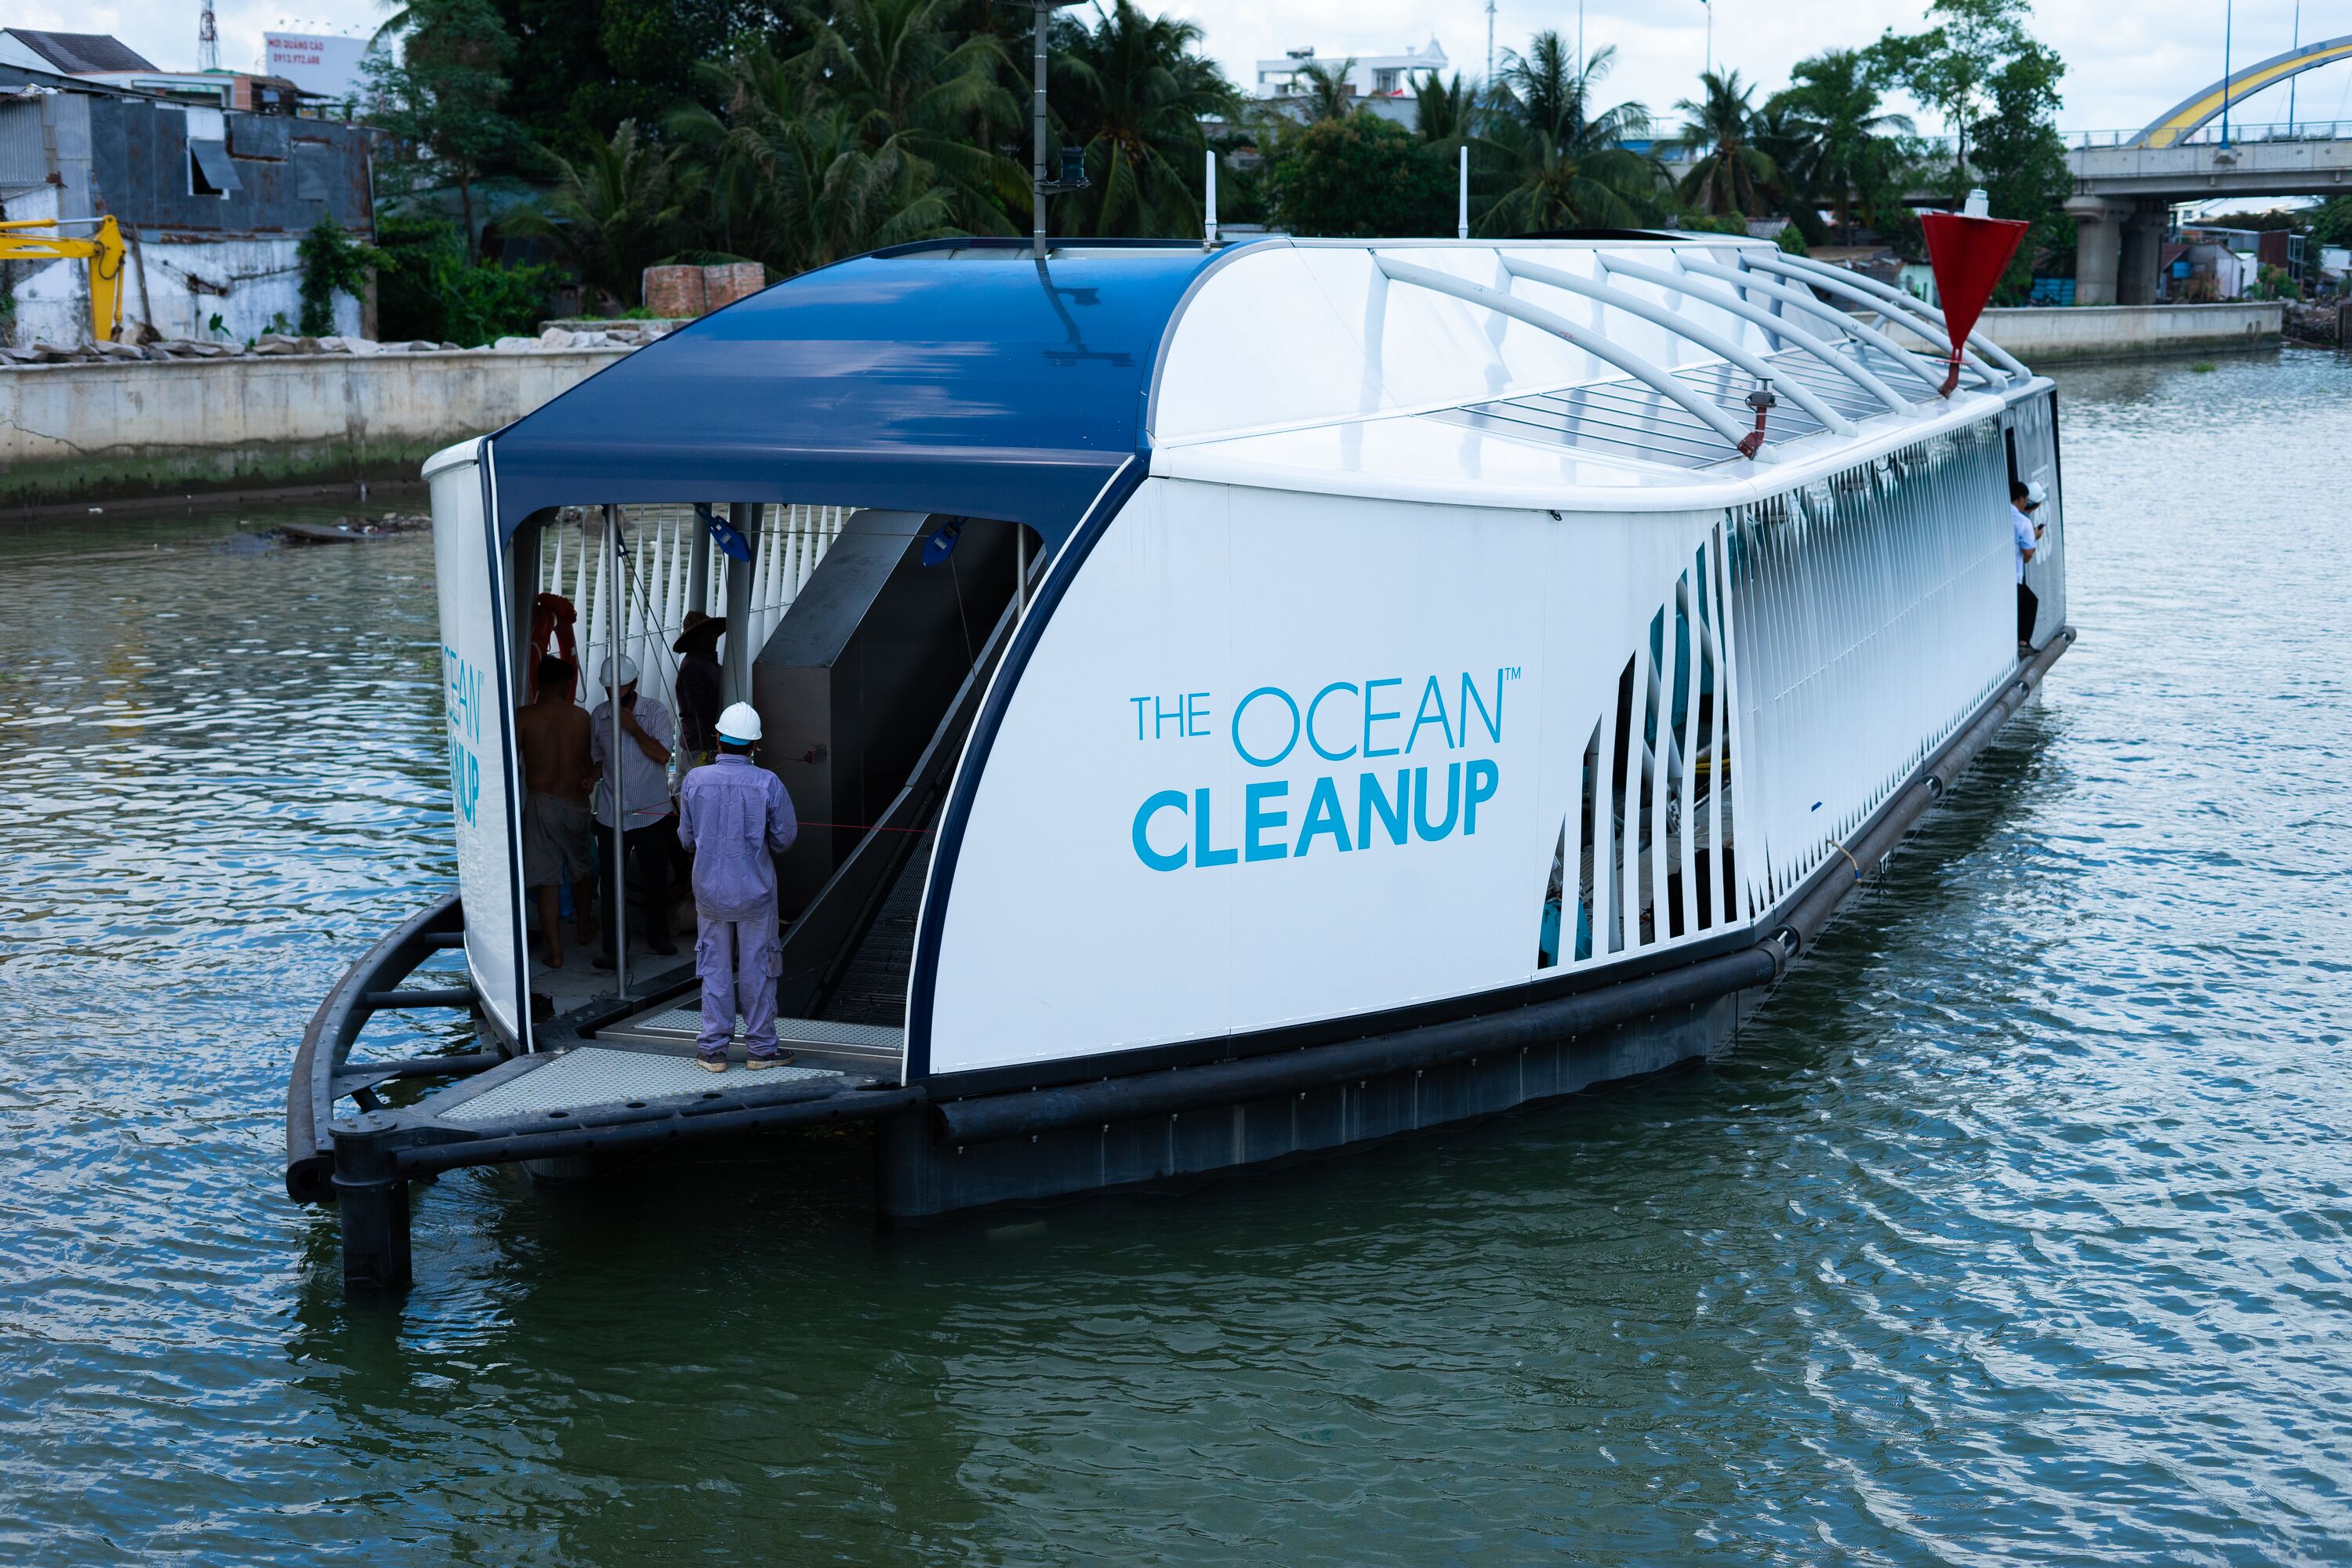 Interceptor 003 in Can Tho River is capable of extracting up to 50,000 kg of trash per day.